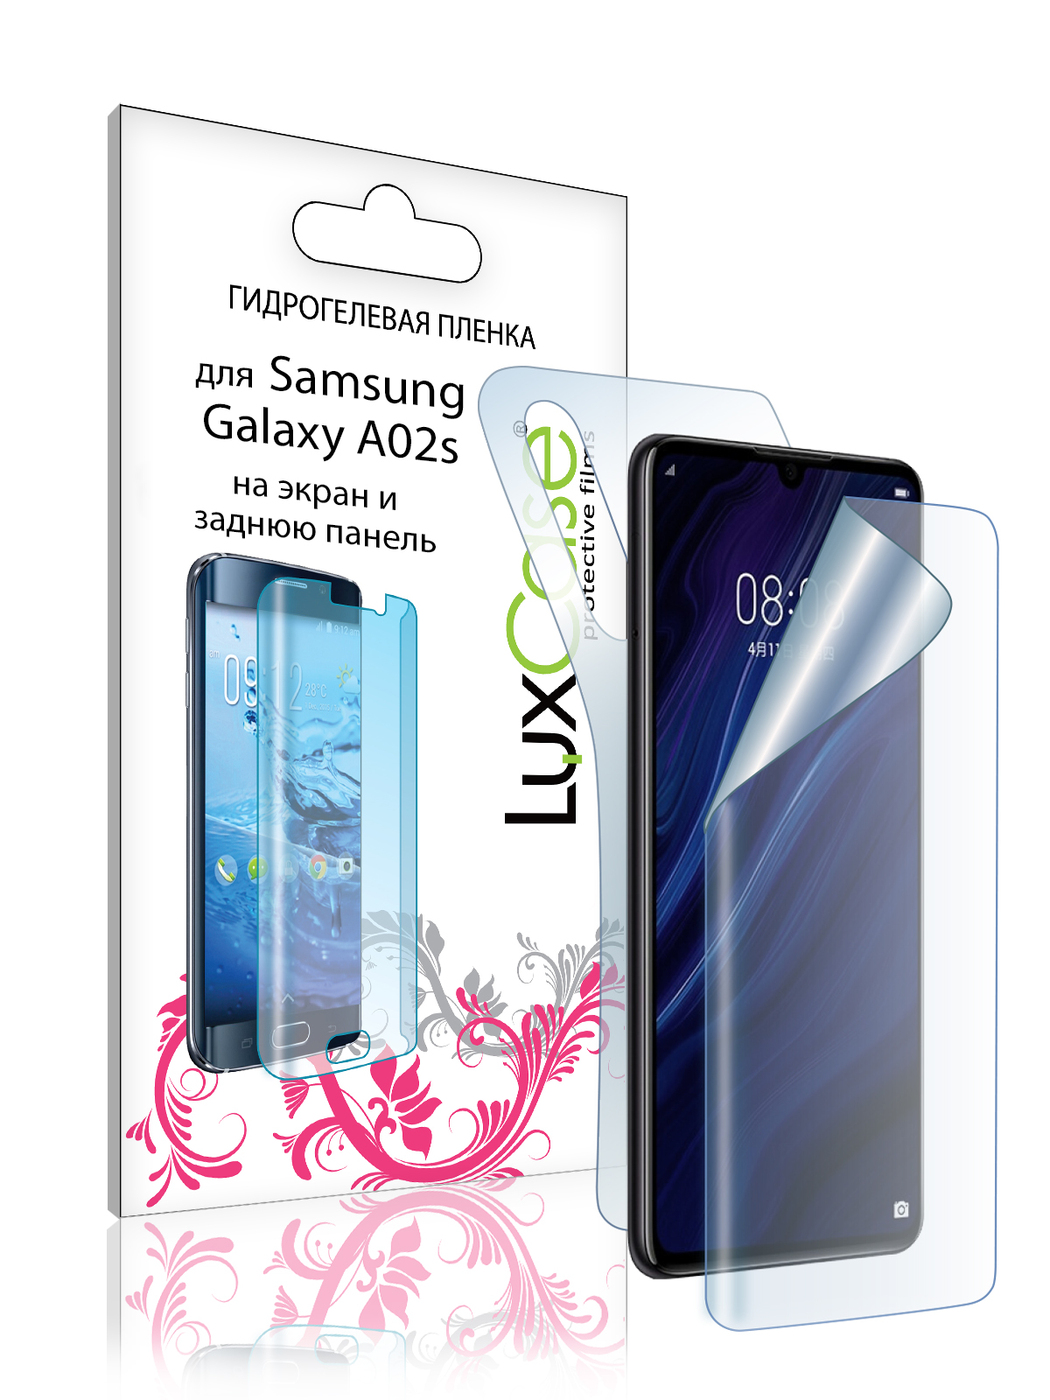 Пленка гидрогелевая LuxCase для Samsung Galaxy A02s 0.14mm Front and Back Transparent 86185 гидрогелевая пленка luxcase для samsung galaxy a02s 0 14mm front and back transparent 86185